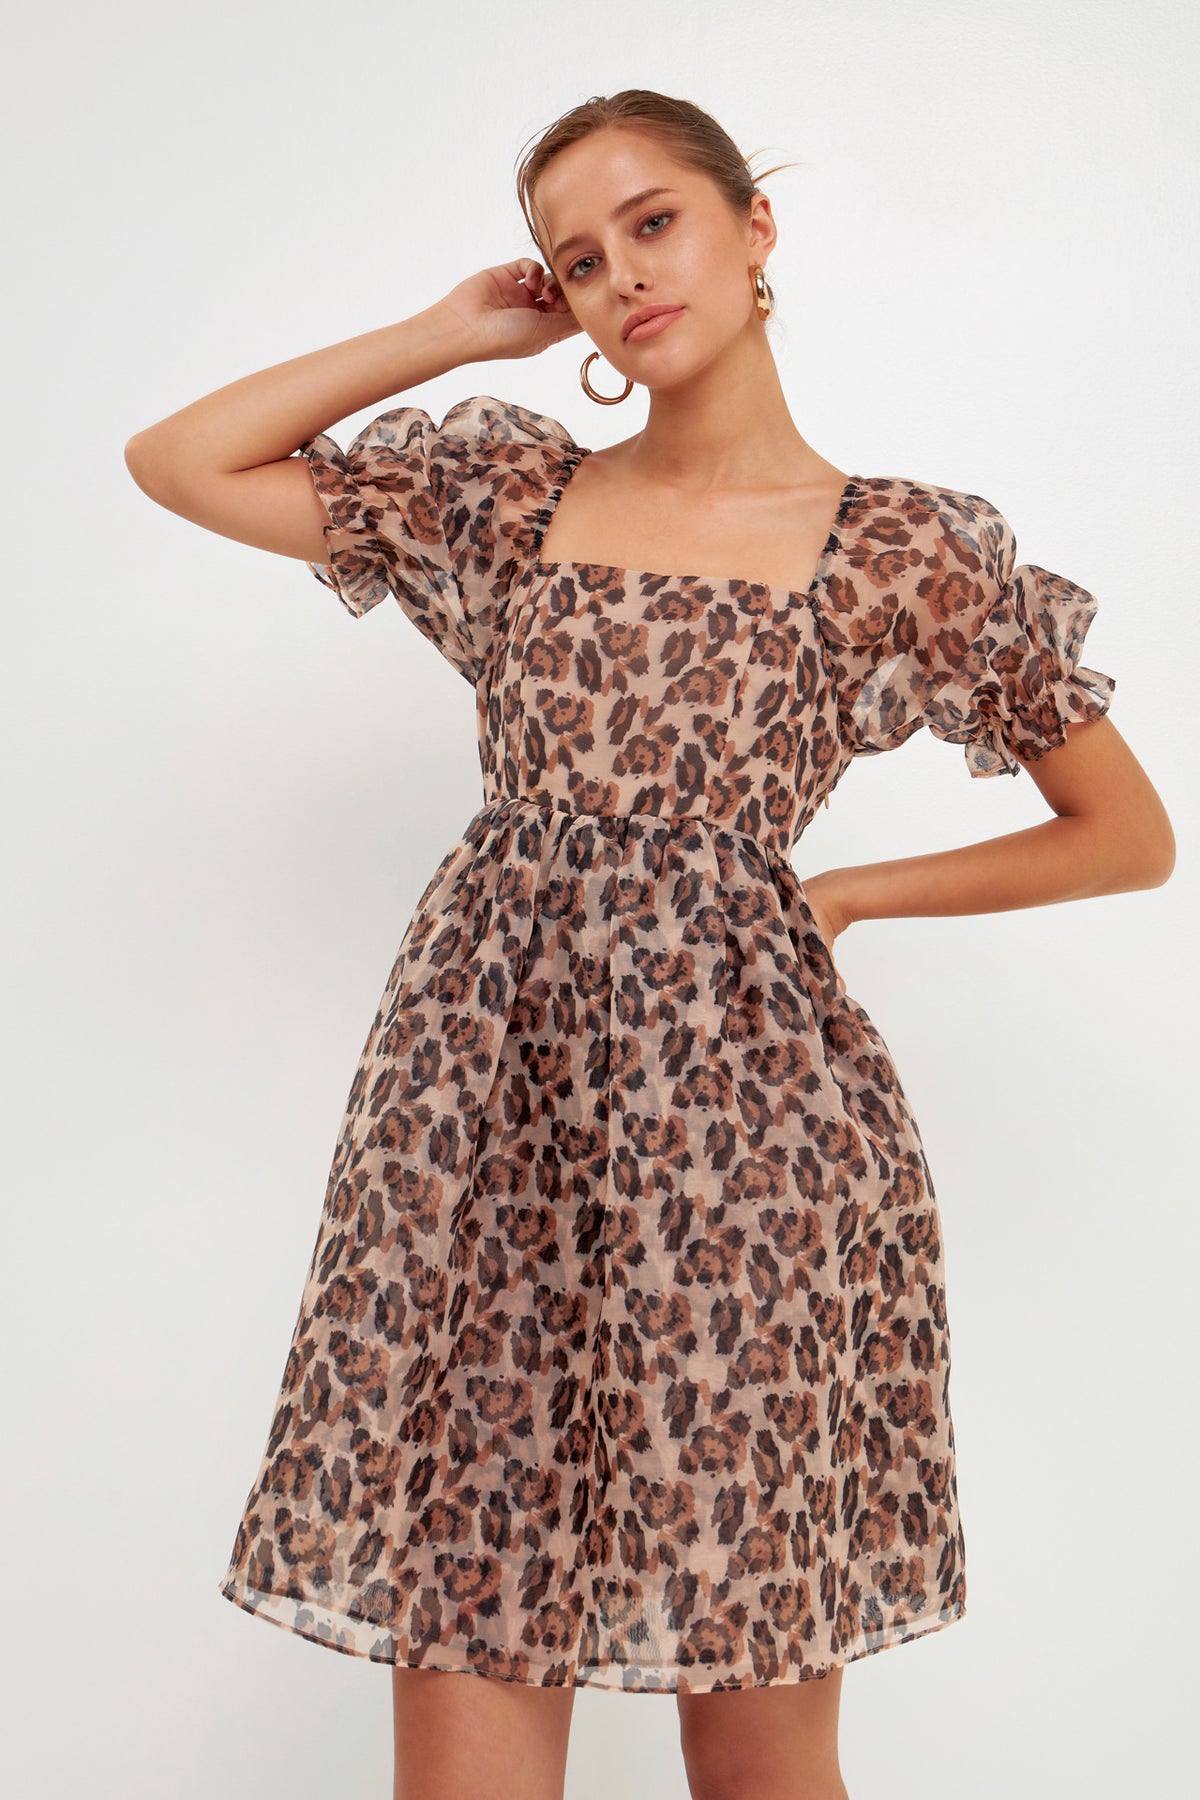 ENDLESS ROSE - Organza Leopard Dress - DRESSES available at Objectrare